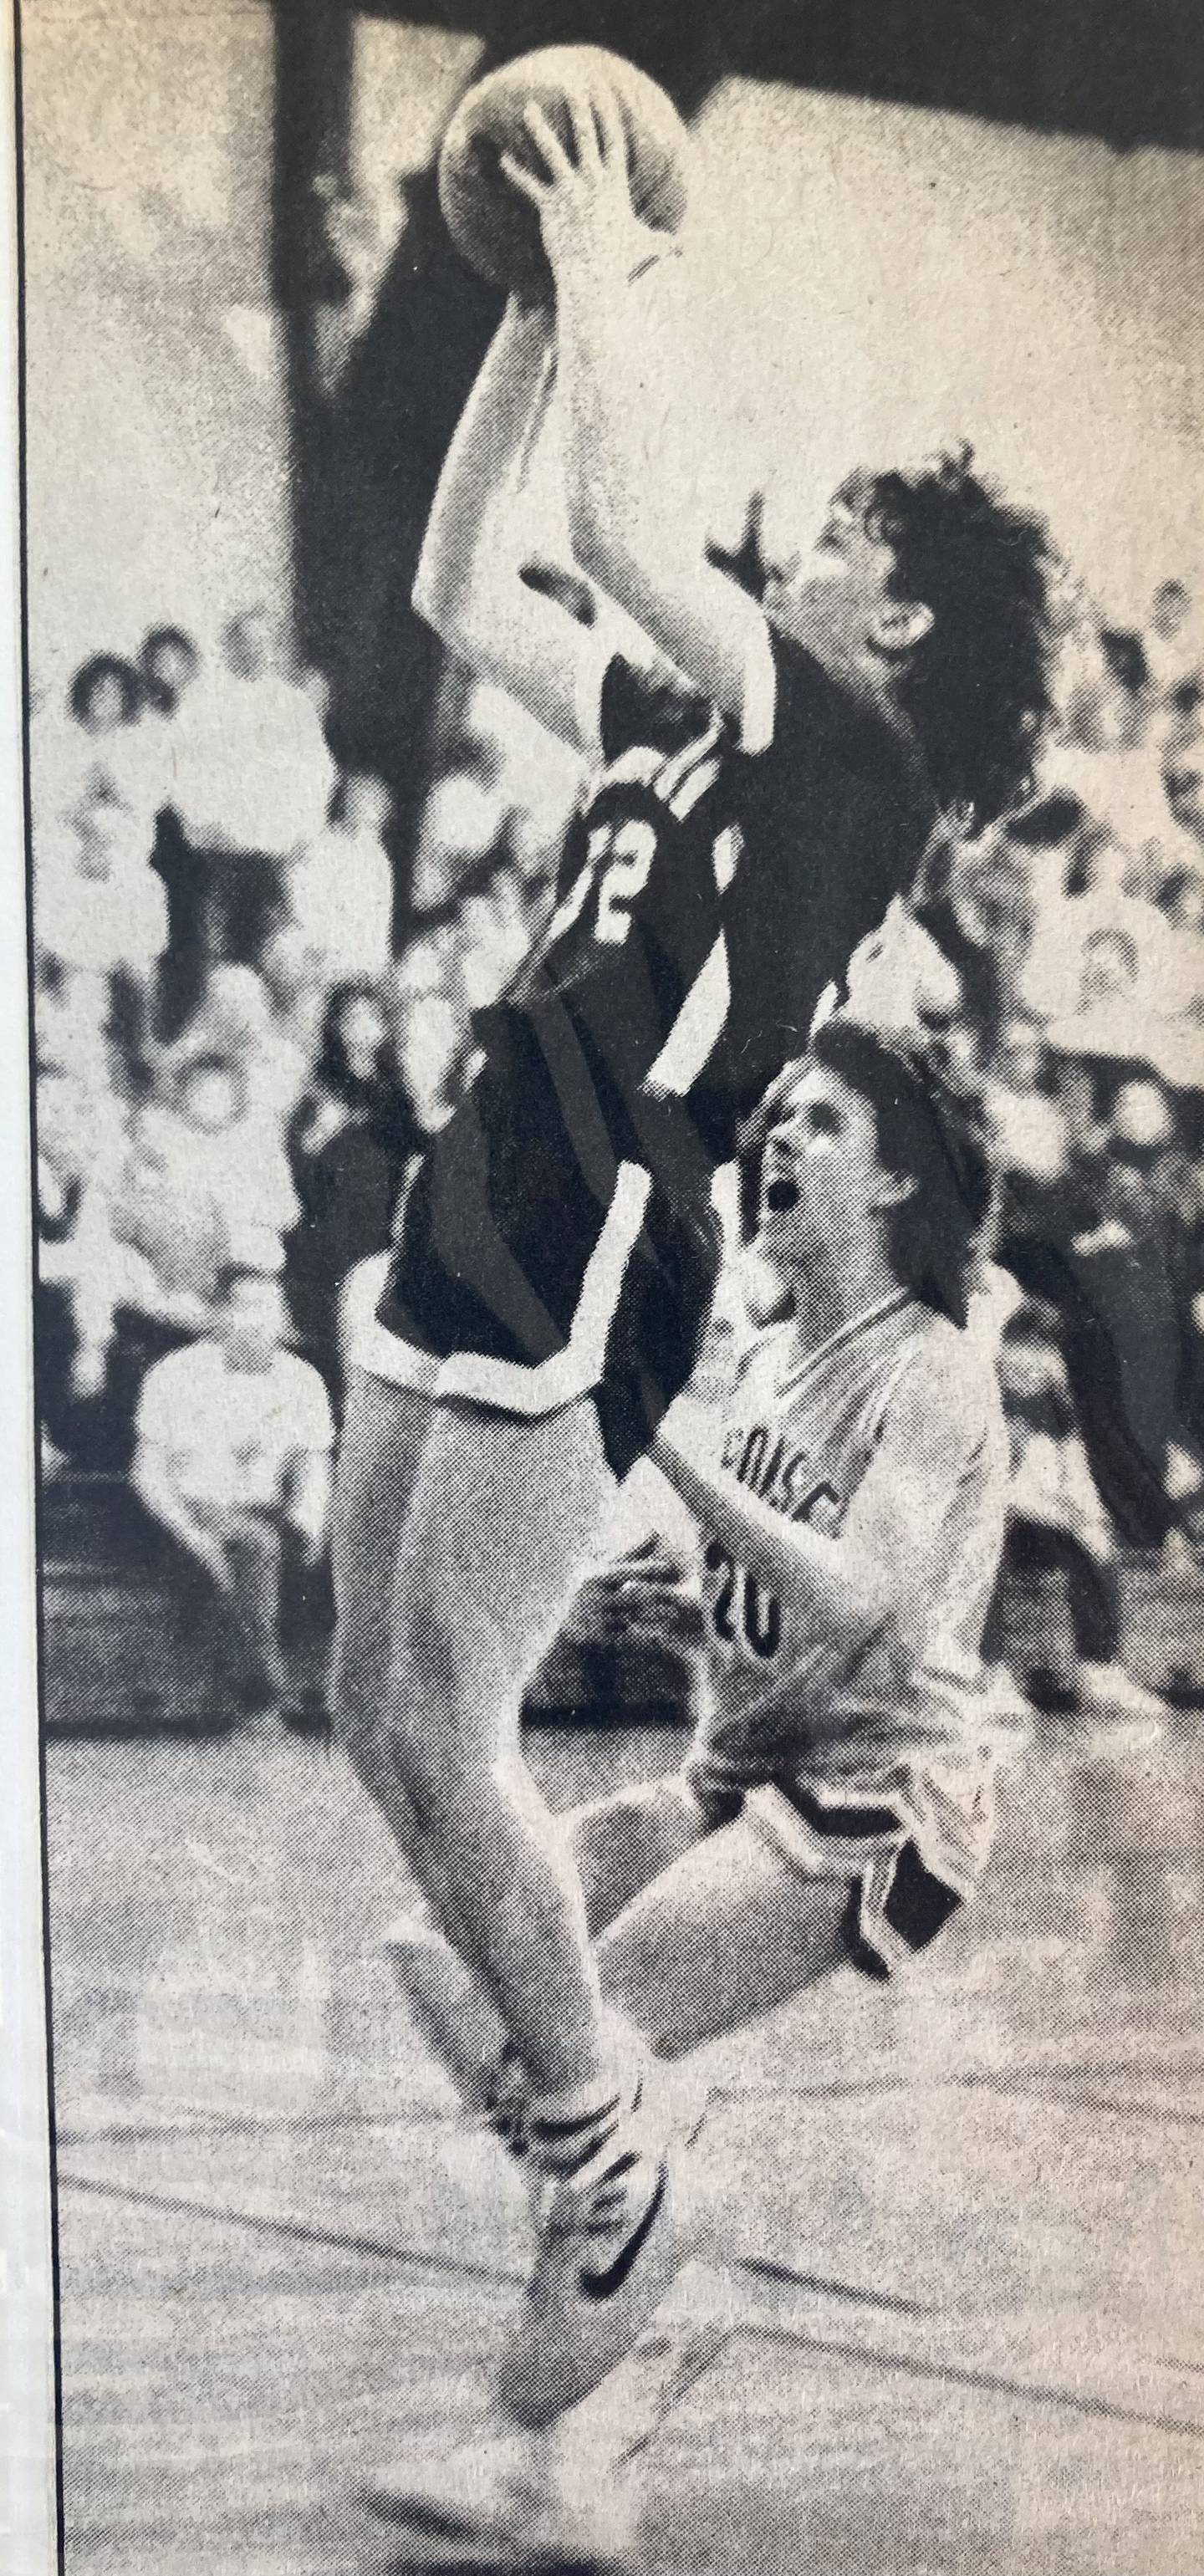 Angie Noble ('87) scored 994 points as a Princeton Tiger.